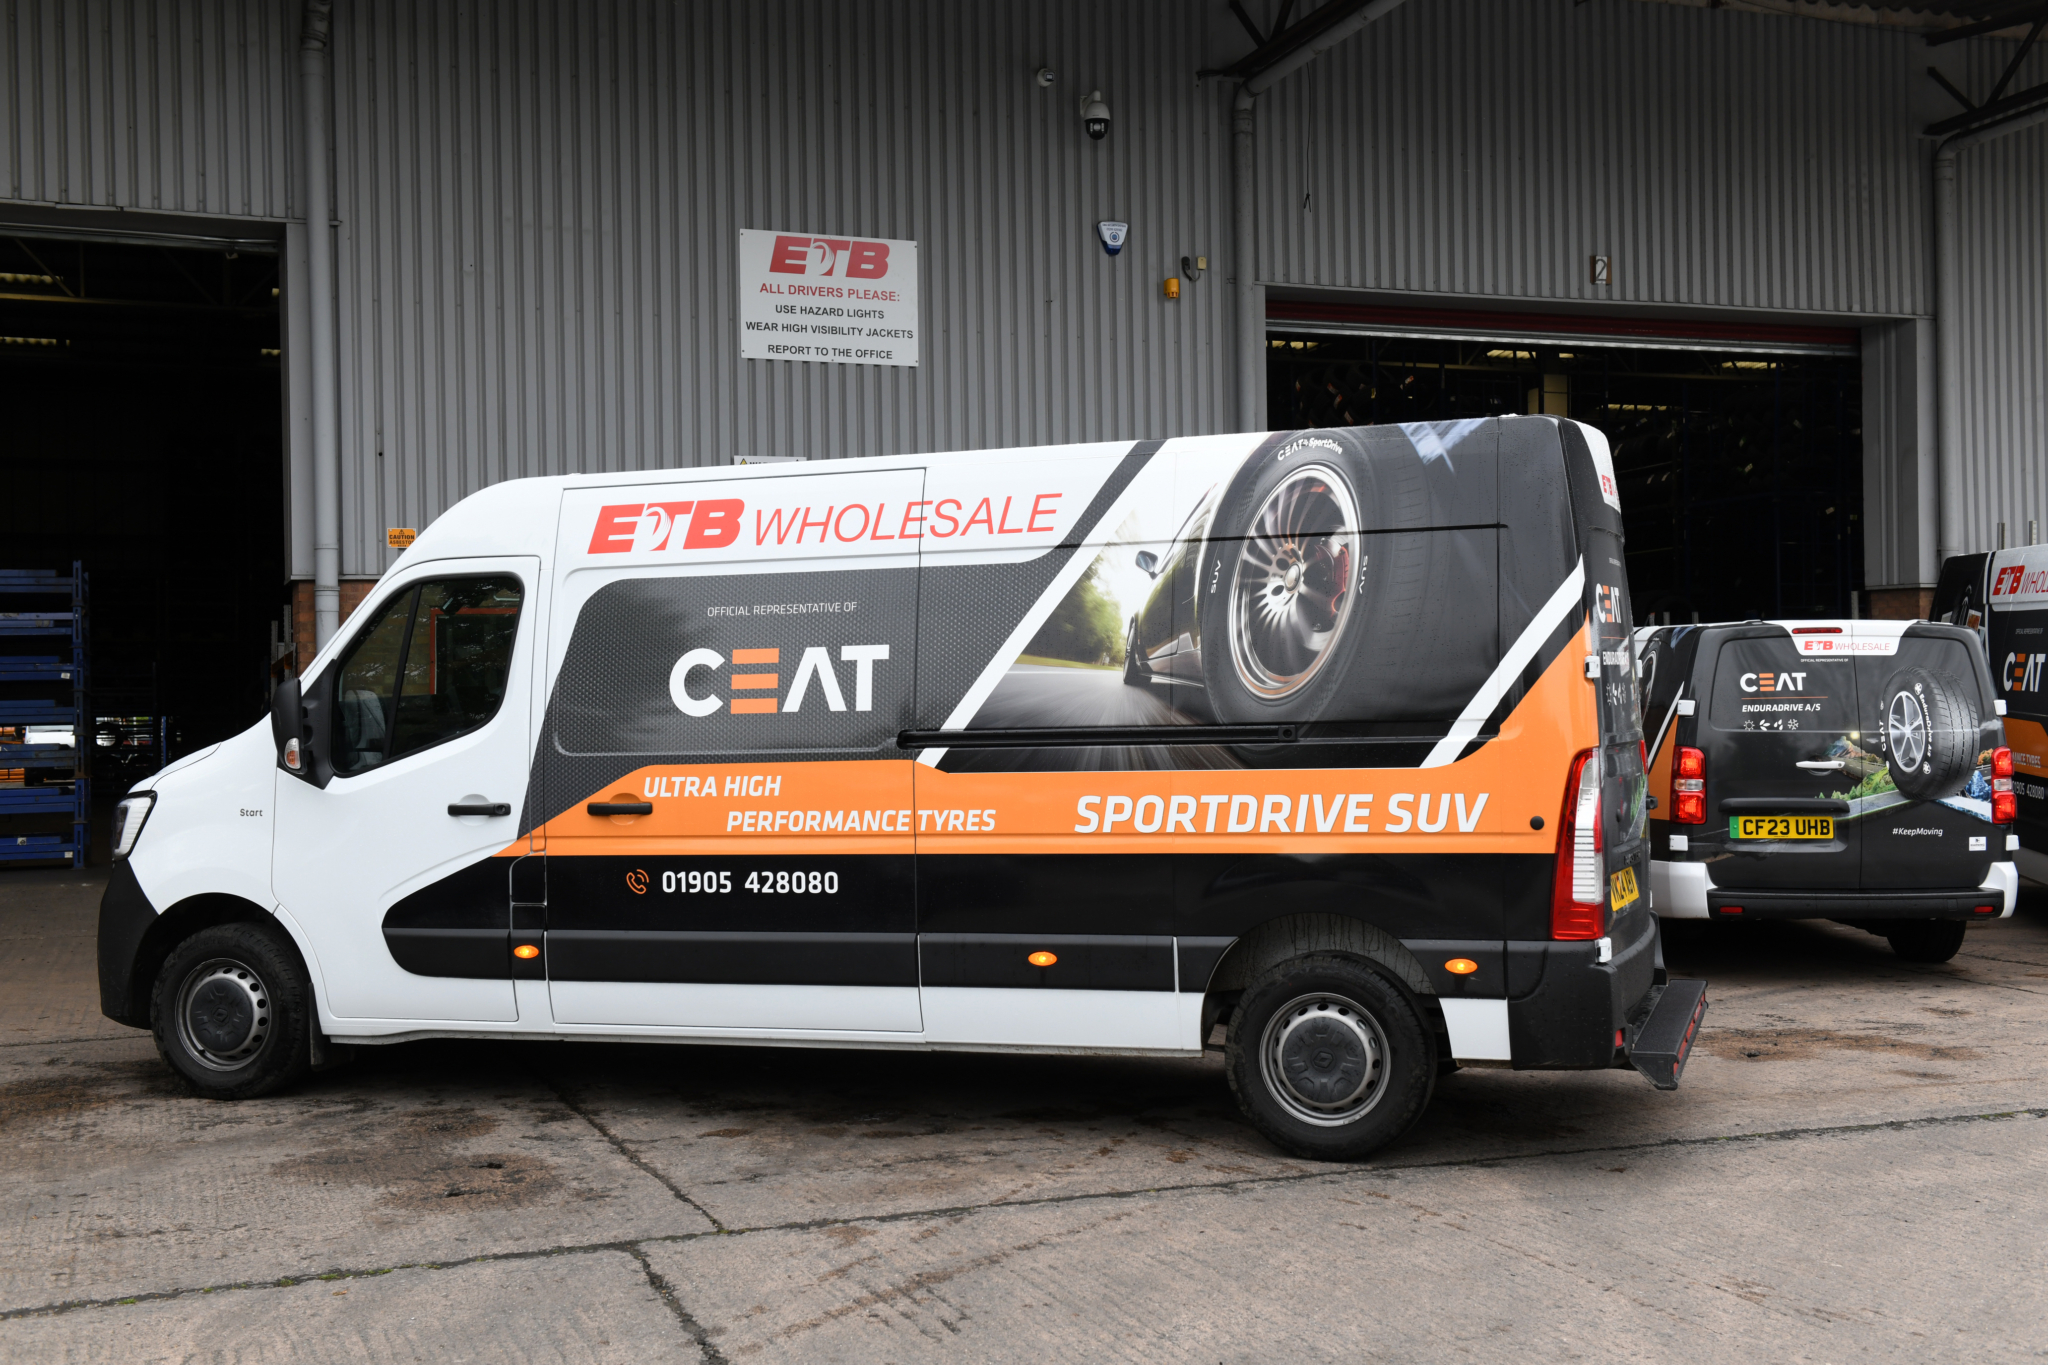 ETB Wholesale partners Ceat as part of growth strategy